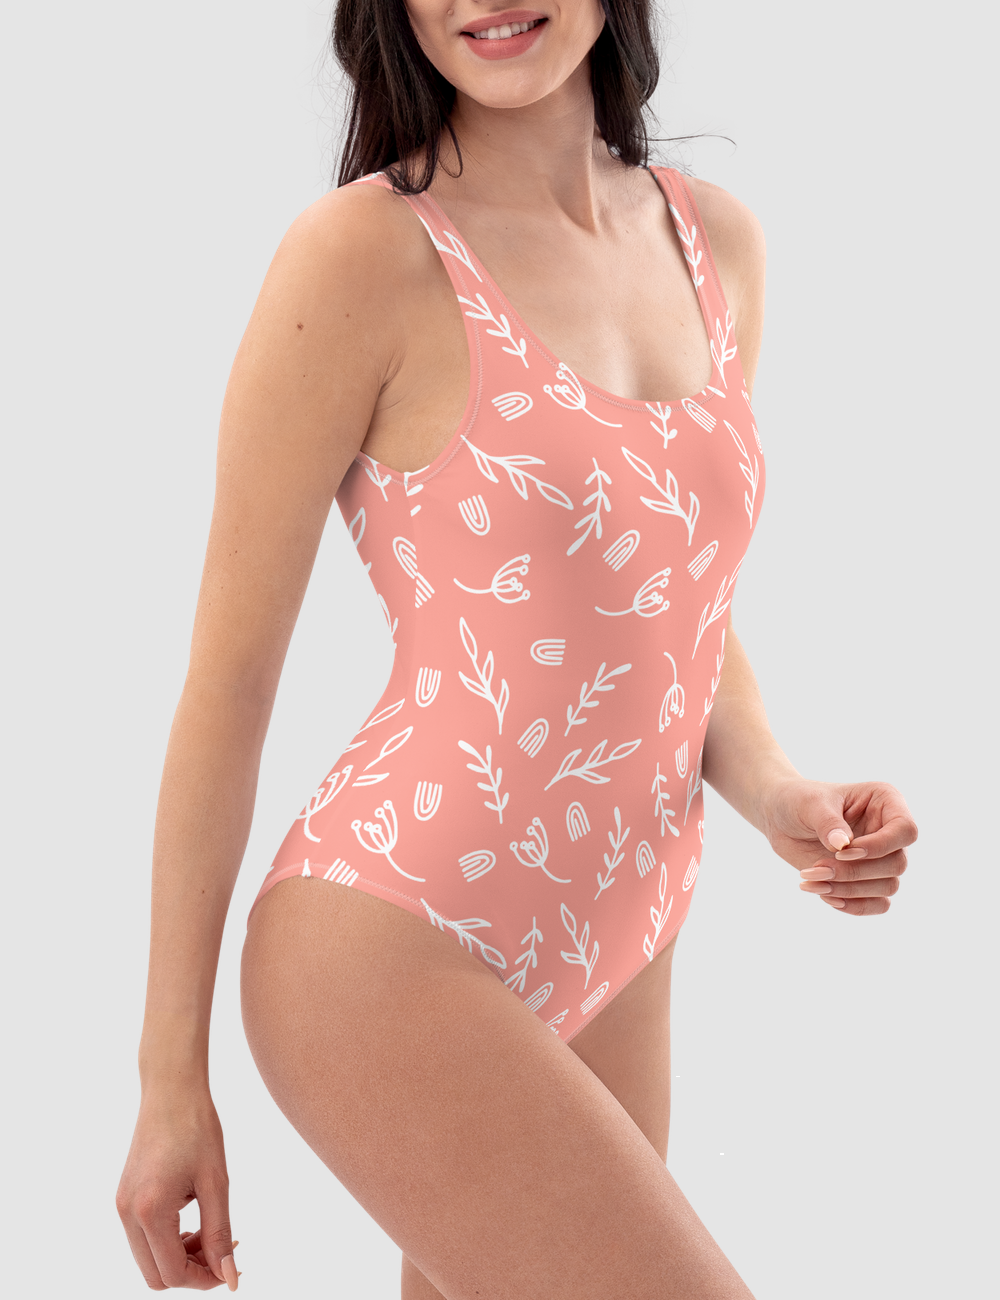 Abstract Boho Rose Bud Floral Pattern | Women's One-Piece Swimsuit OniTakai